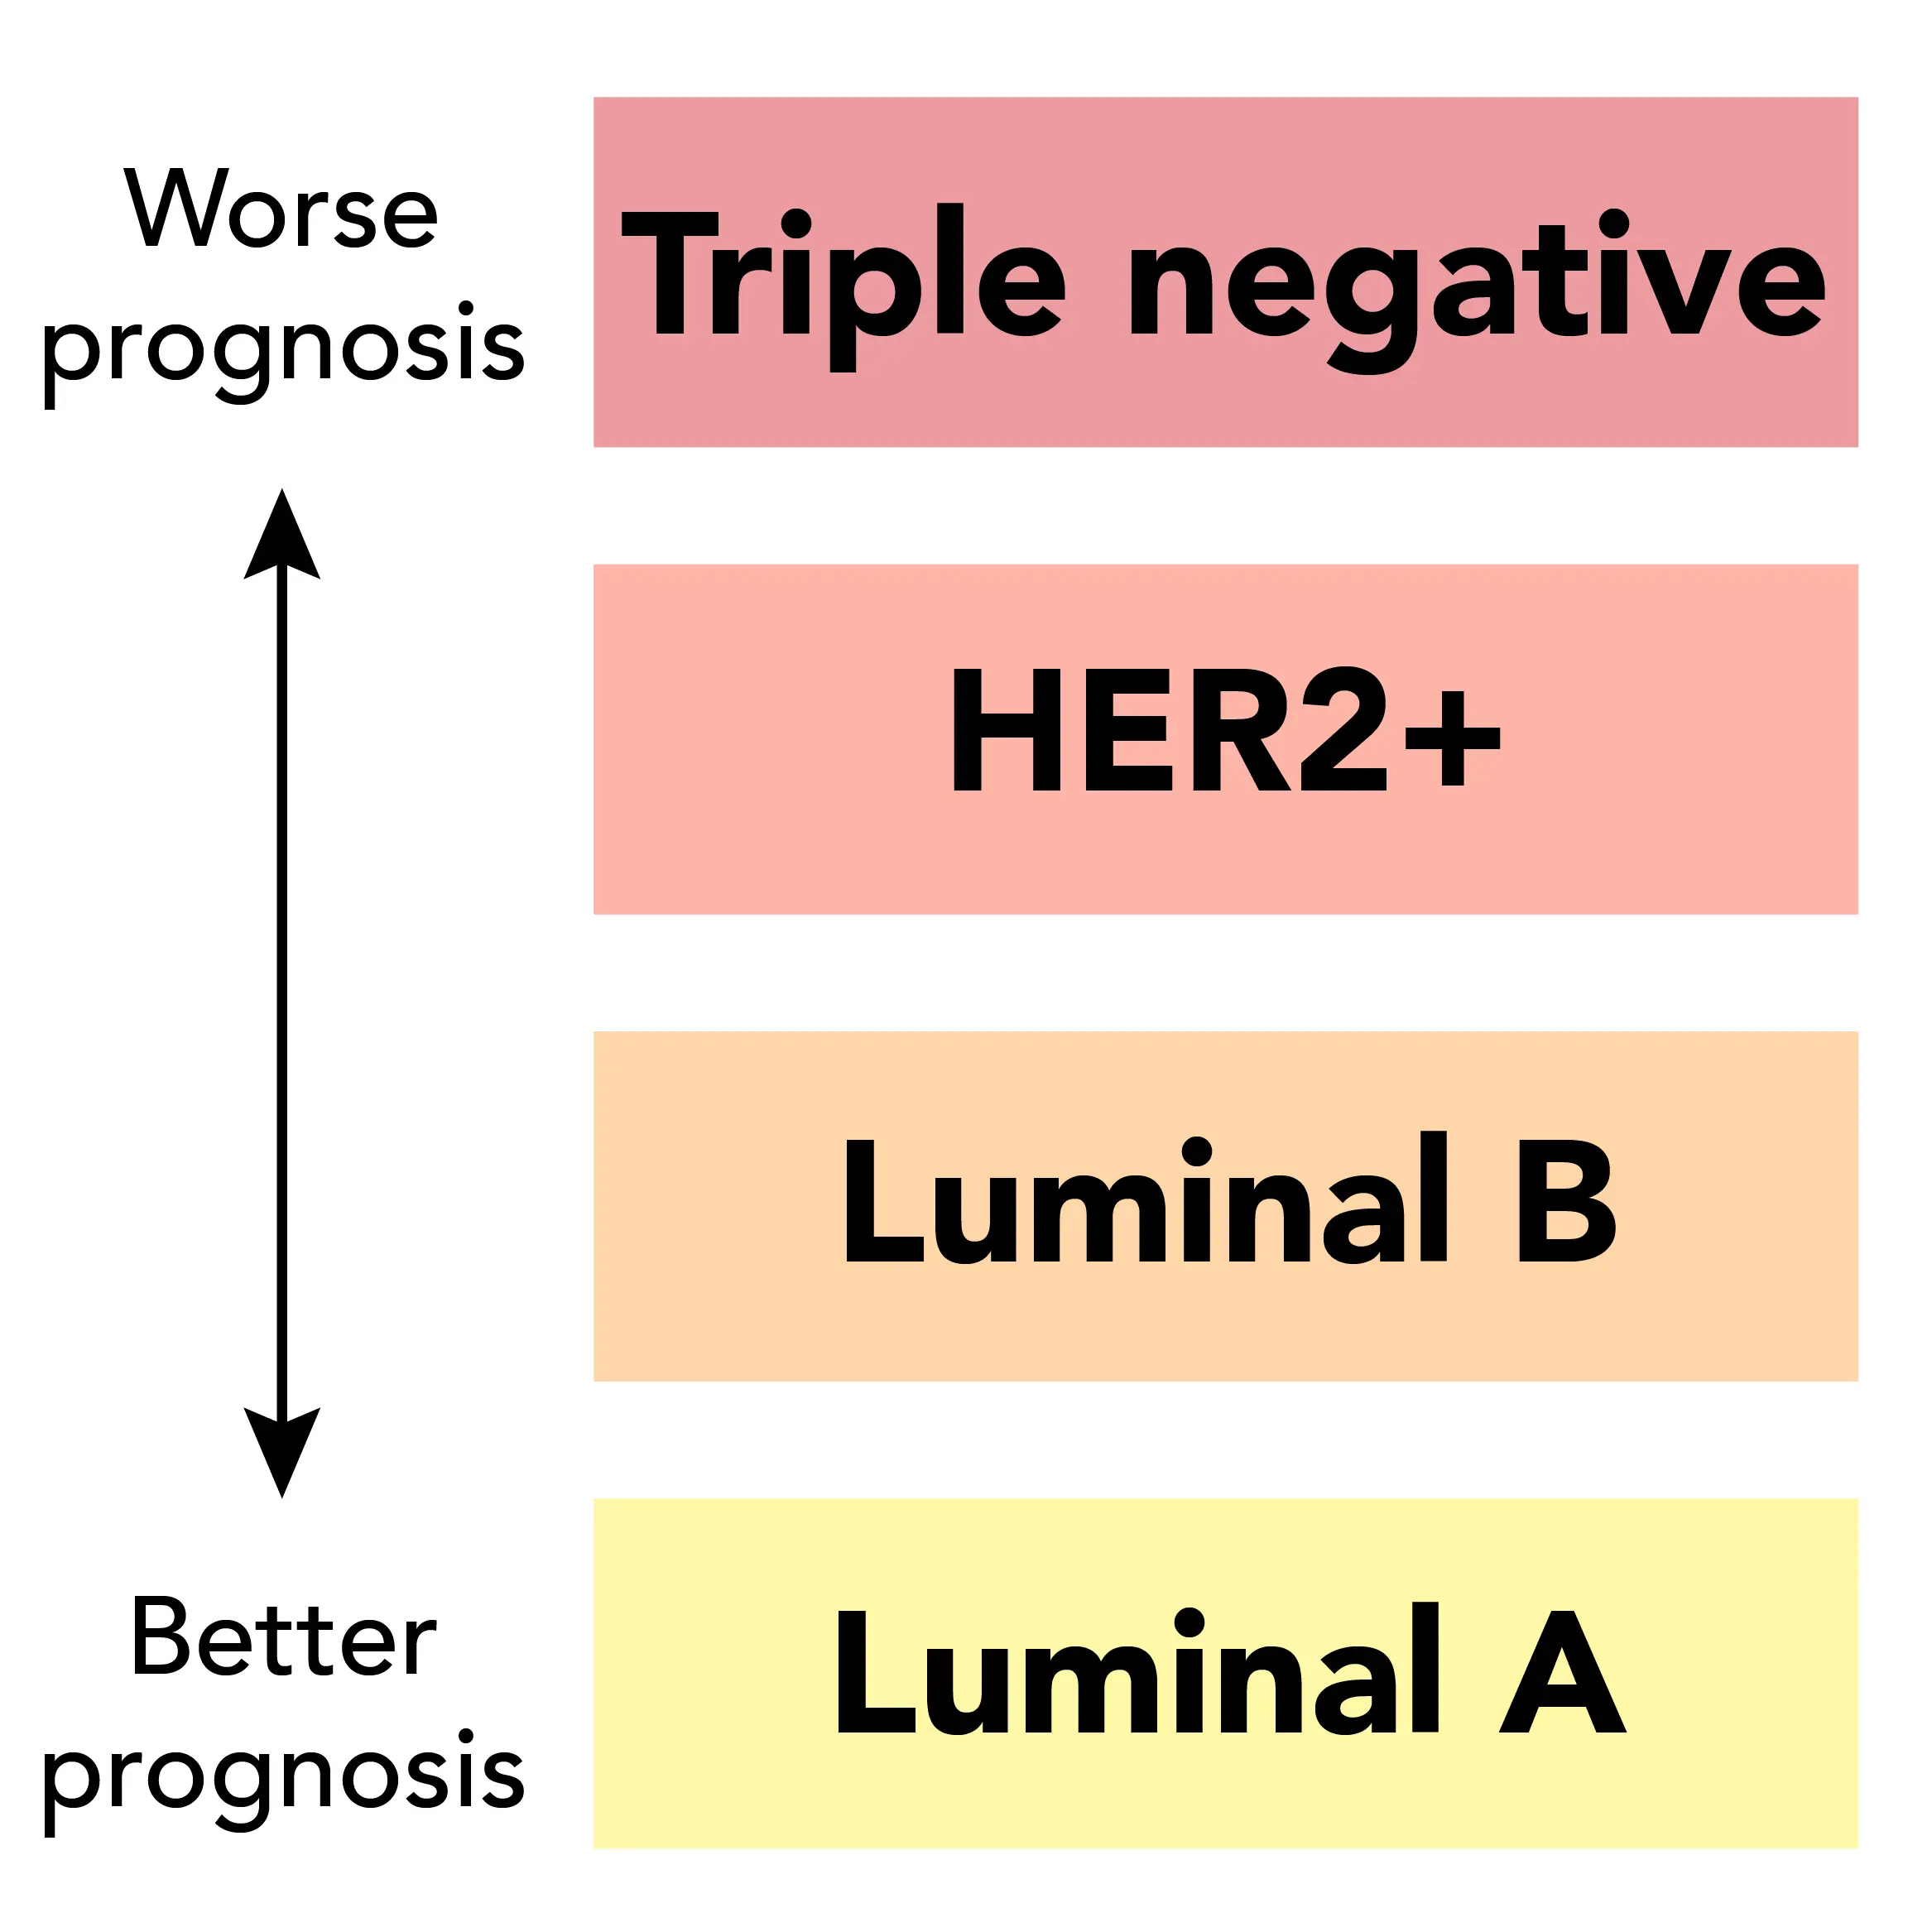 Luminal A-like breast cancers have the best prognosis, while triple-negative breast cancers have the worst.